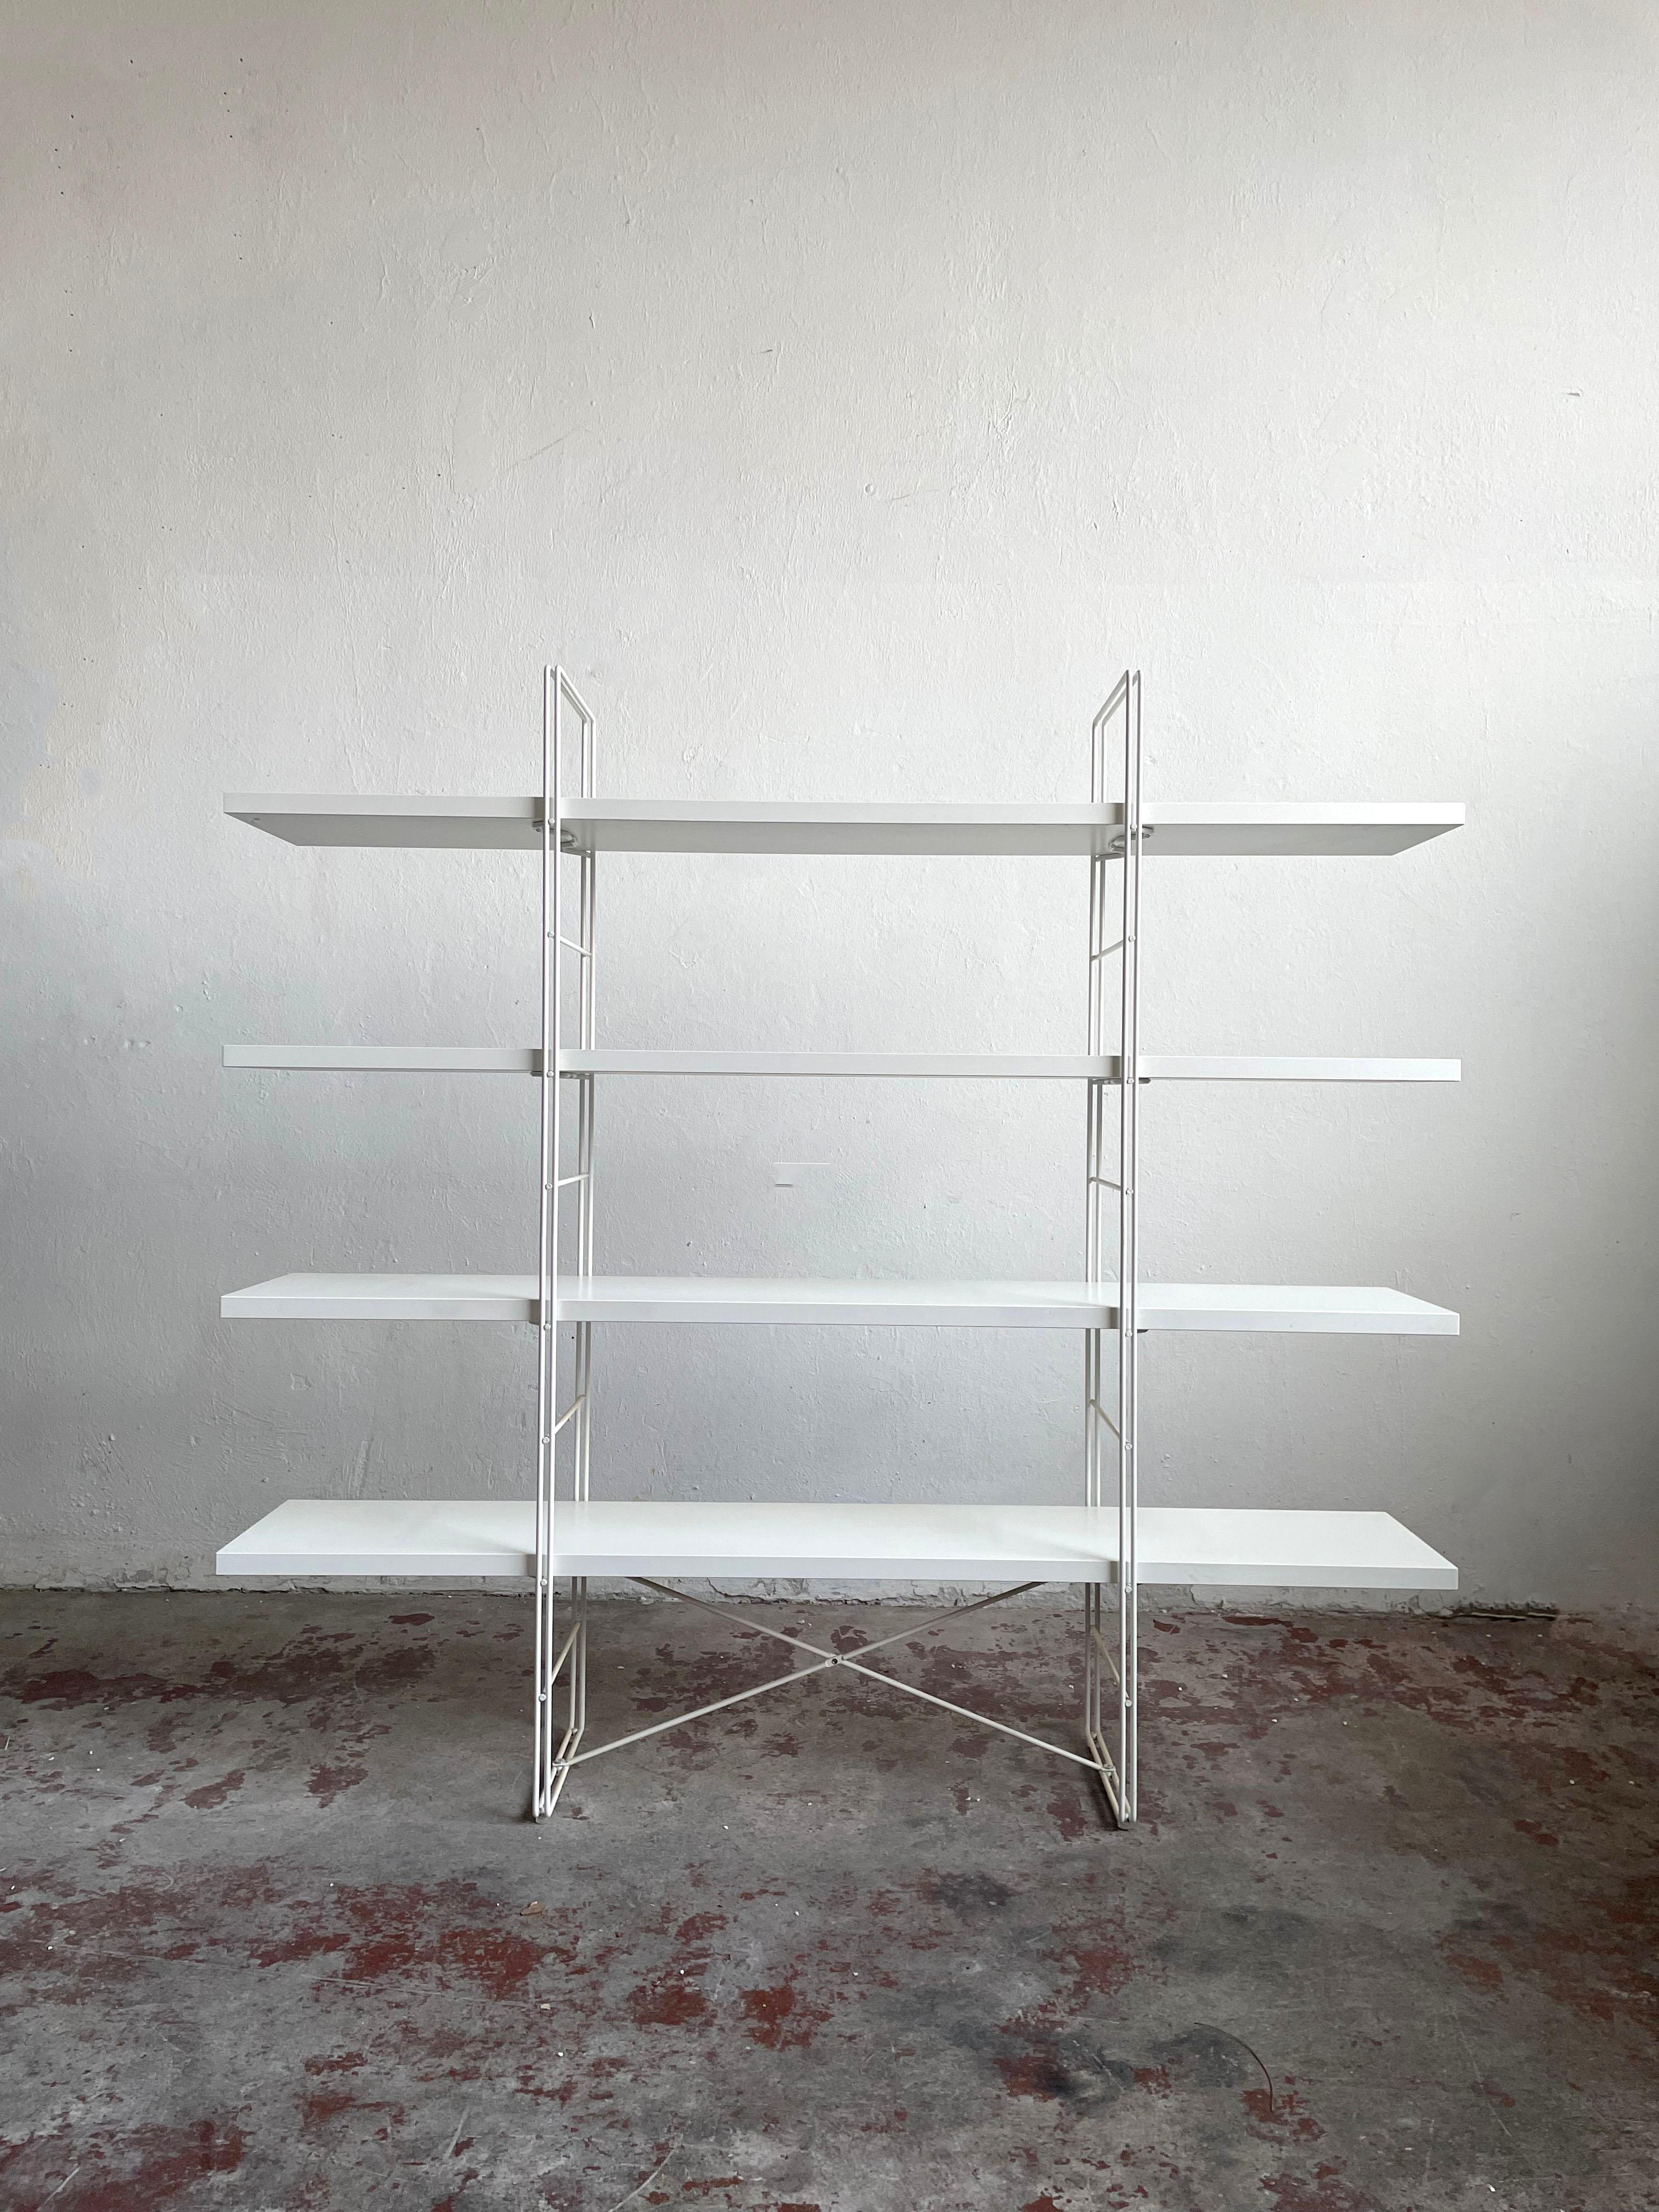 “Guide” Shelving Unit is a modern design classic designed by Niels Gammelgaard for IKEA in 1985.

The sturdy minimalist structure is made of powder-coated steel in white color. It has four minimalist white shelves made of laminated chipboard.